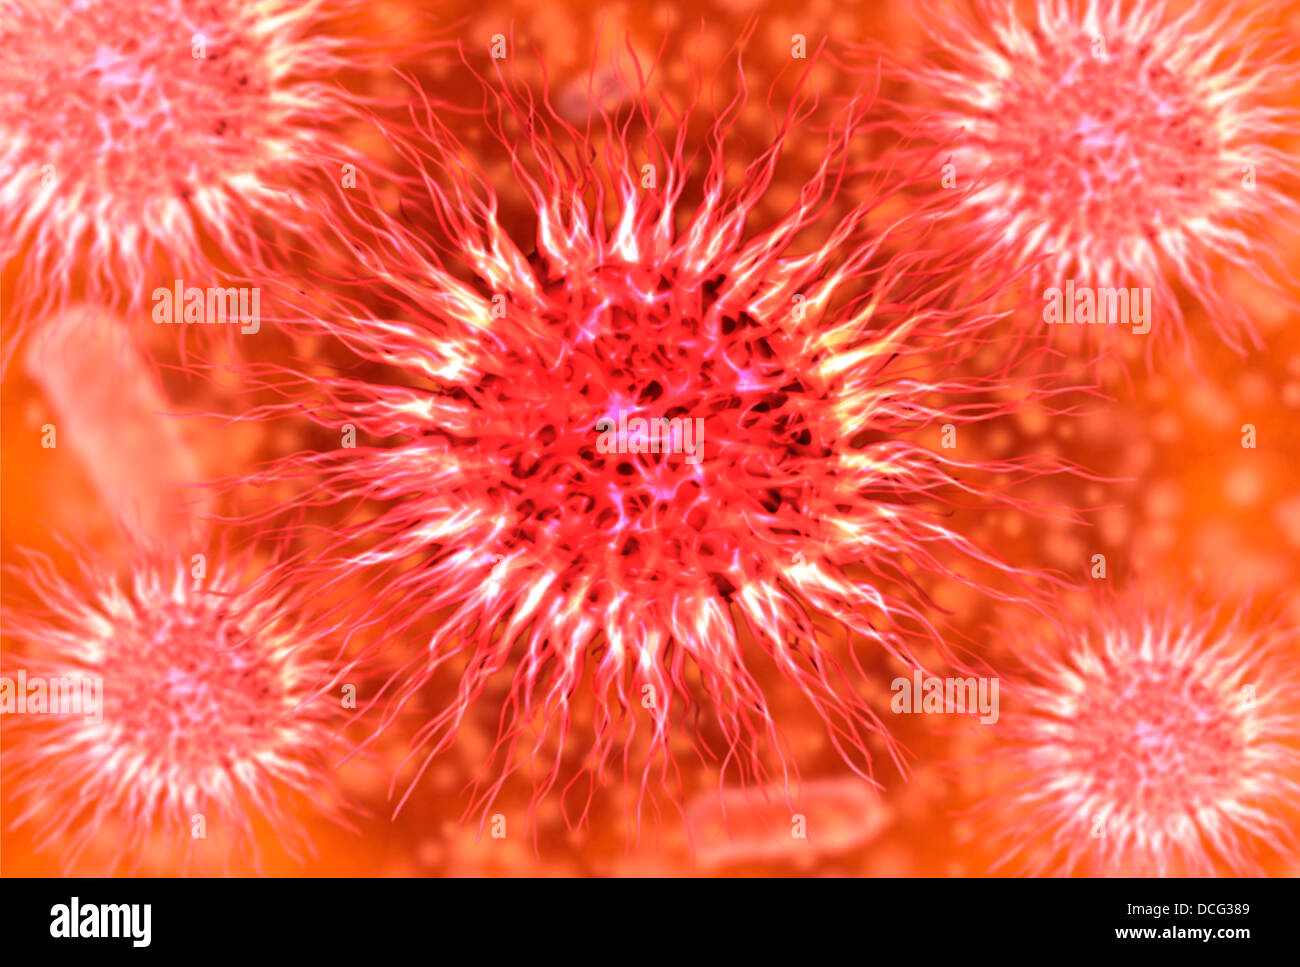 Microscopic view of dendrimers. Dendrimers are repetitively branched molecules. Stock Photo